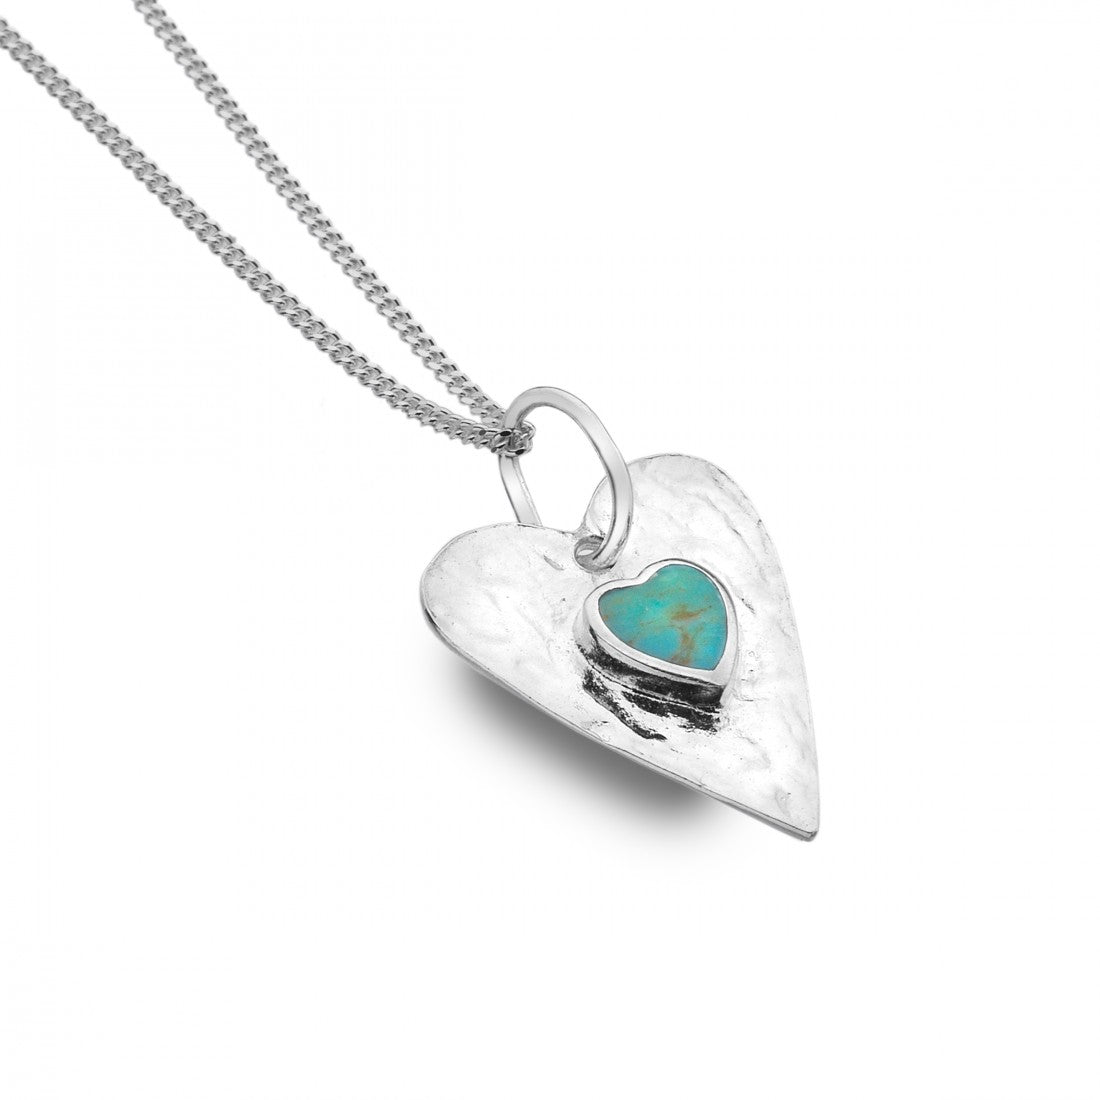 Turquoise Heart Necklace - The Nancy Smillie Shop - Art, Jewellery & Designer Gifts Glasgow